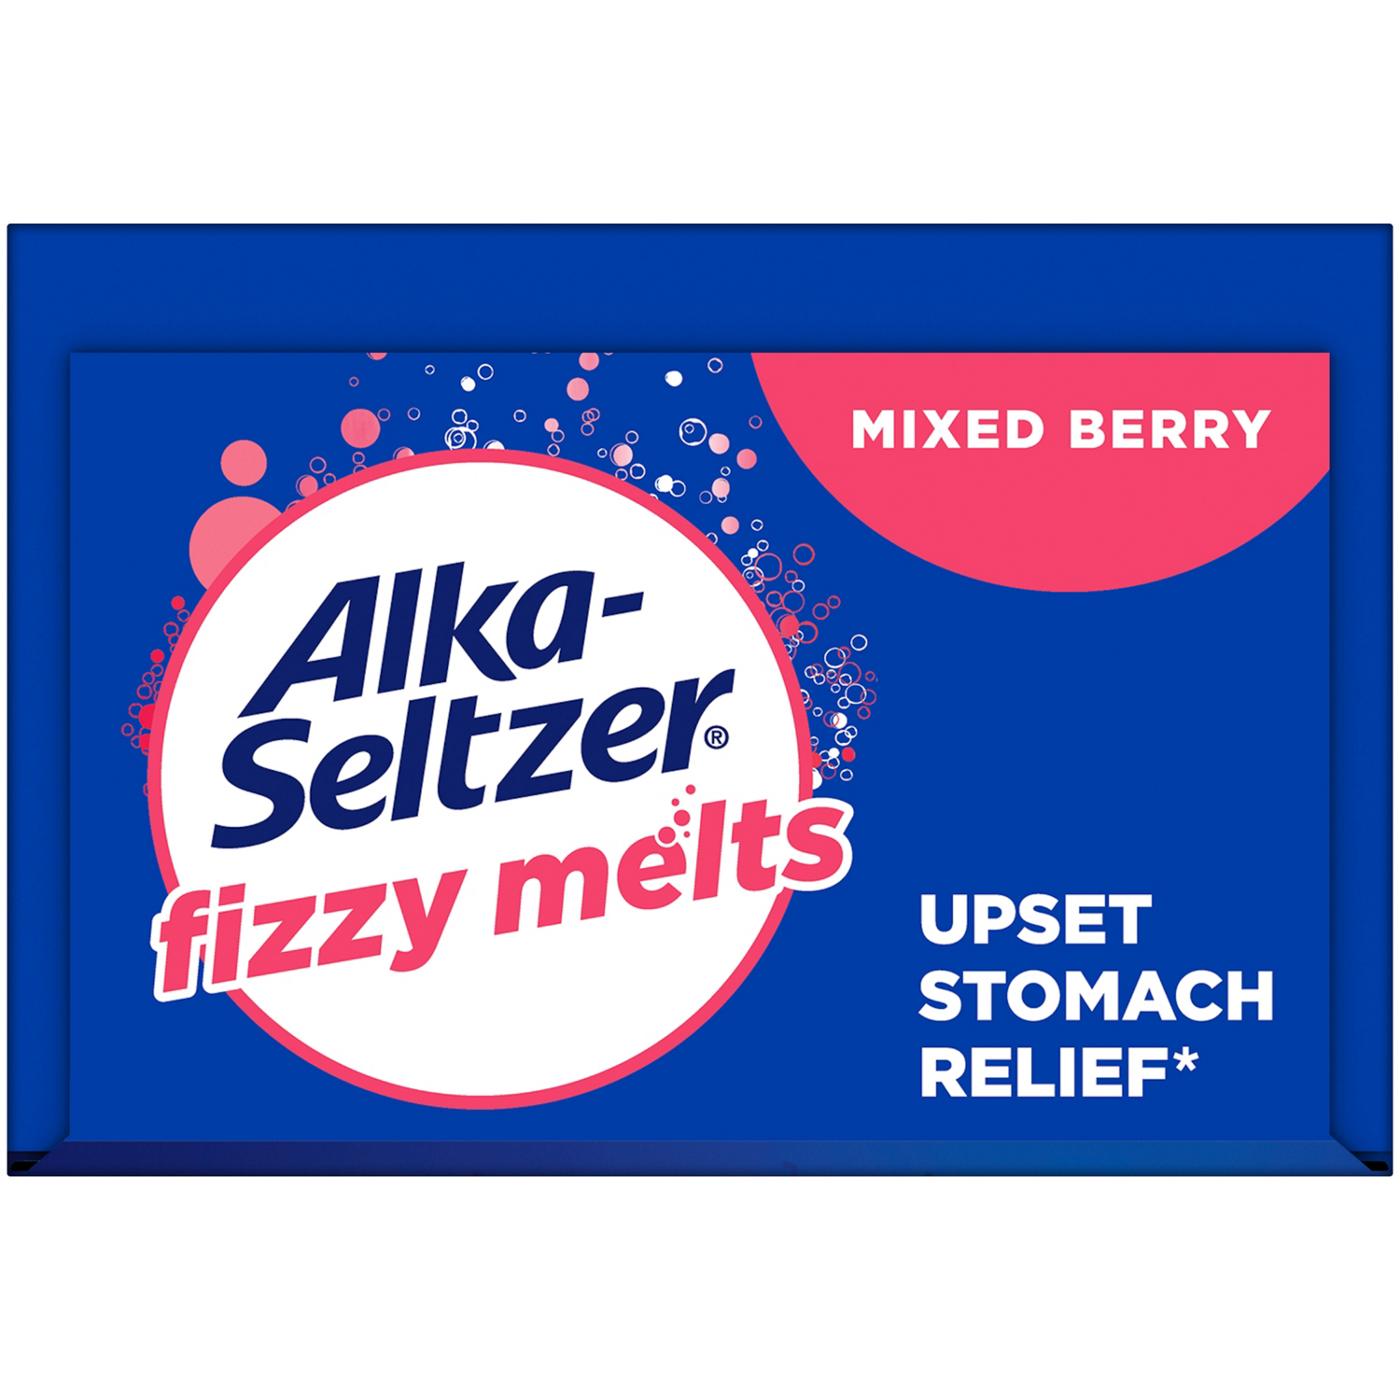 Alka-Seltzer Fizzy Melts Tablets - Mixed Berry; image 5 of 6